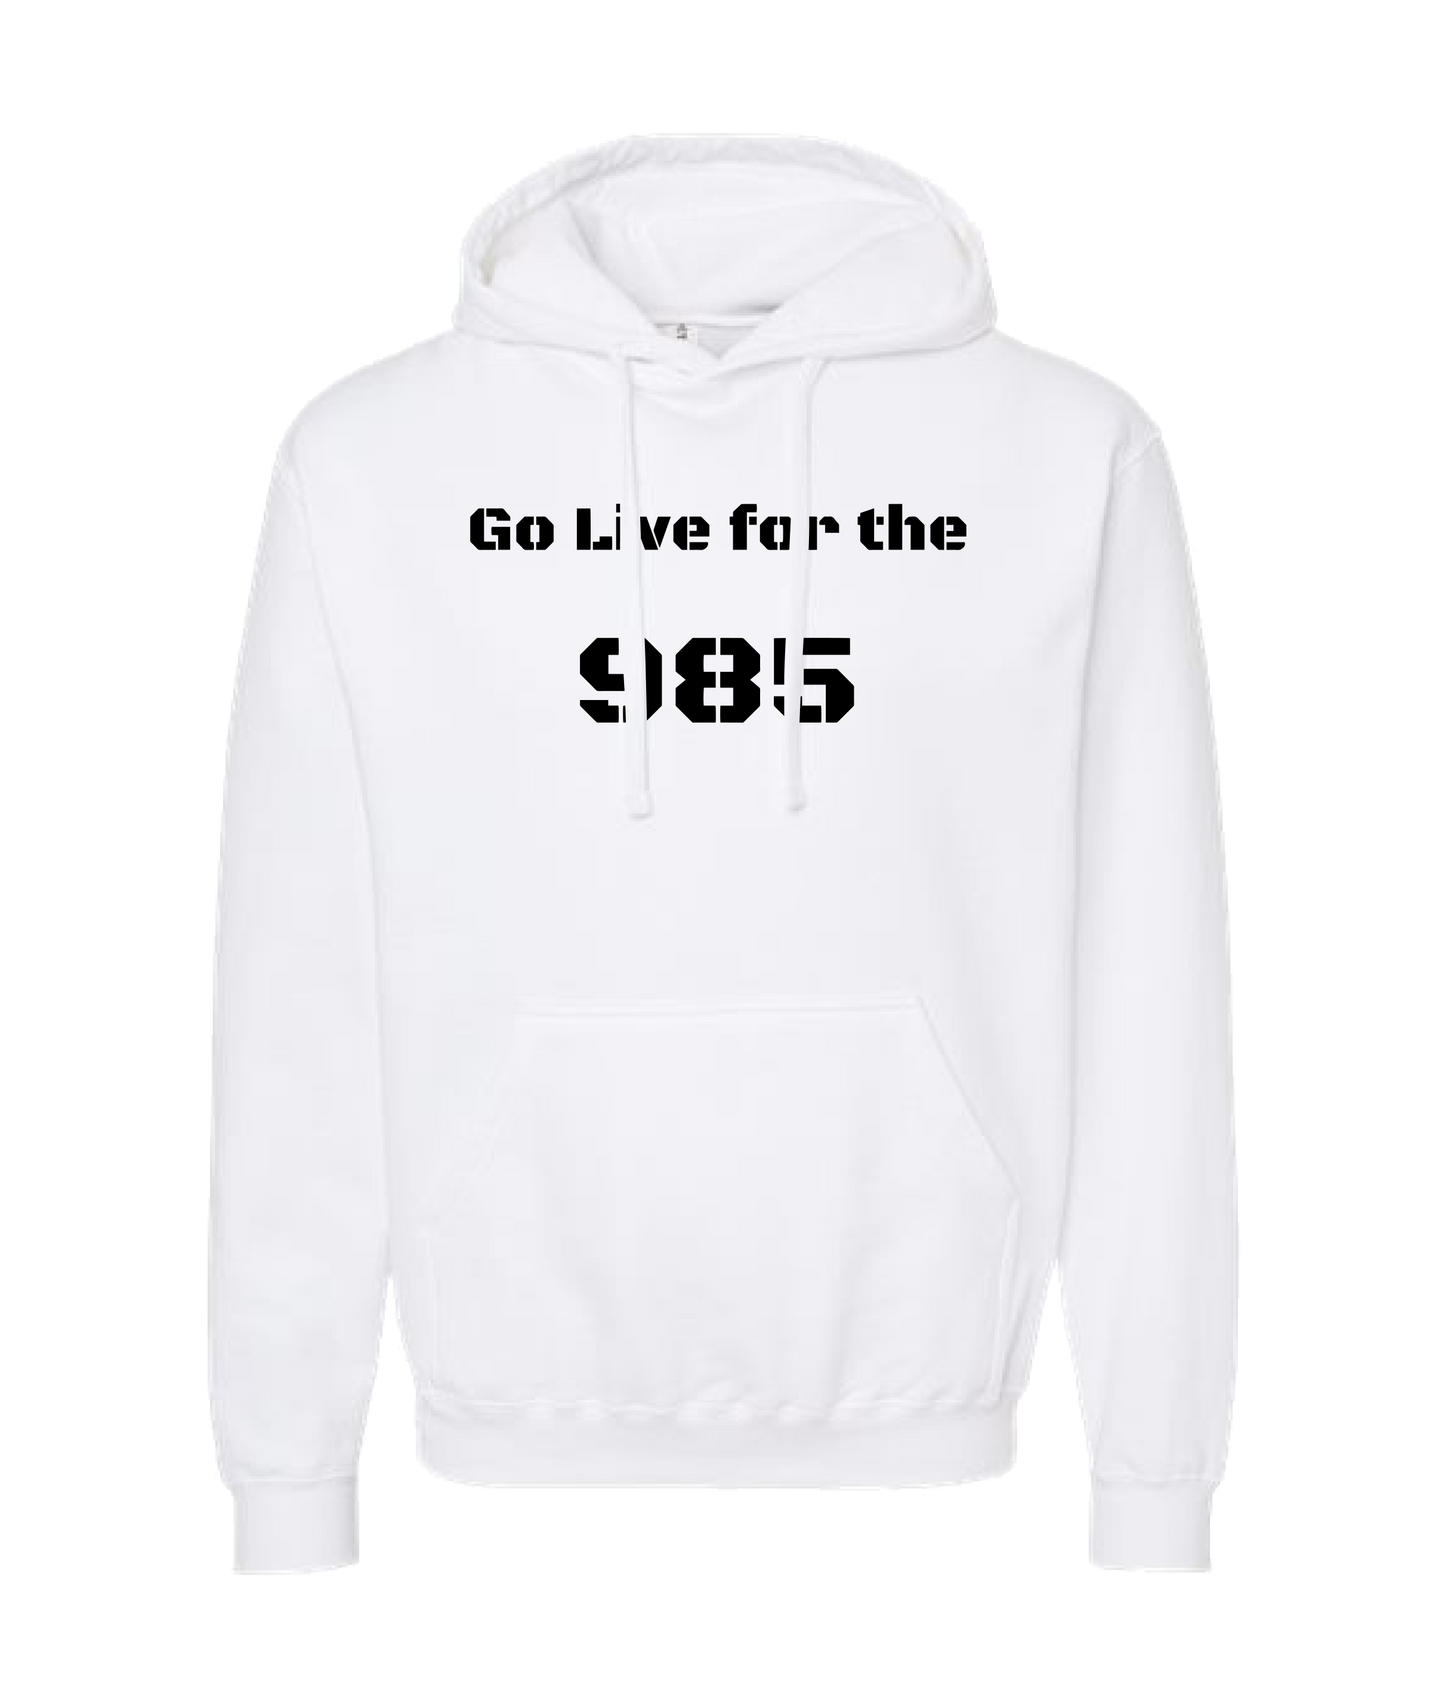 985Chris - Go Live for the 985 - White Hoodie